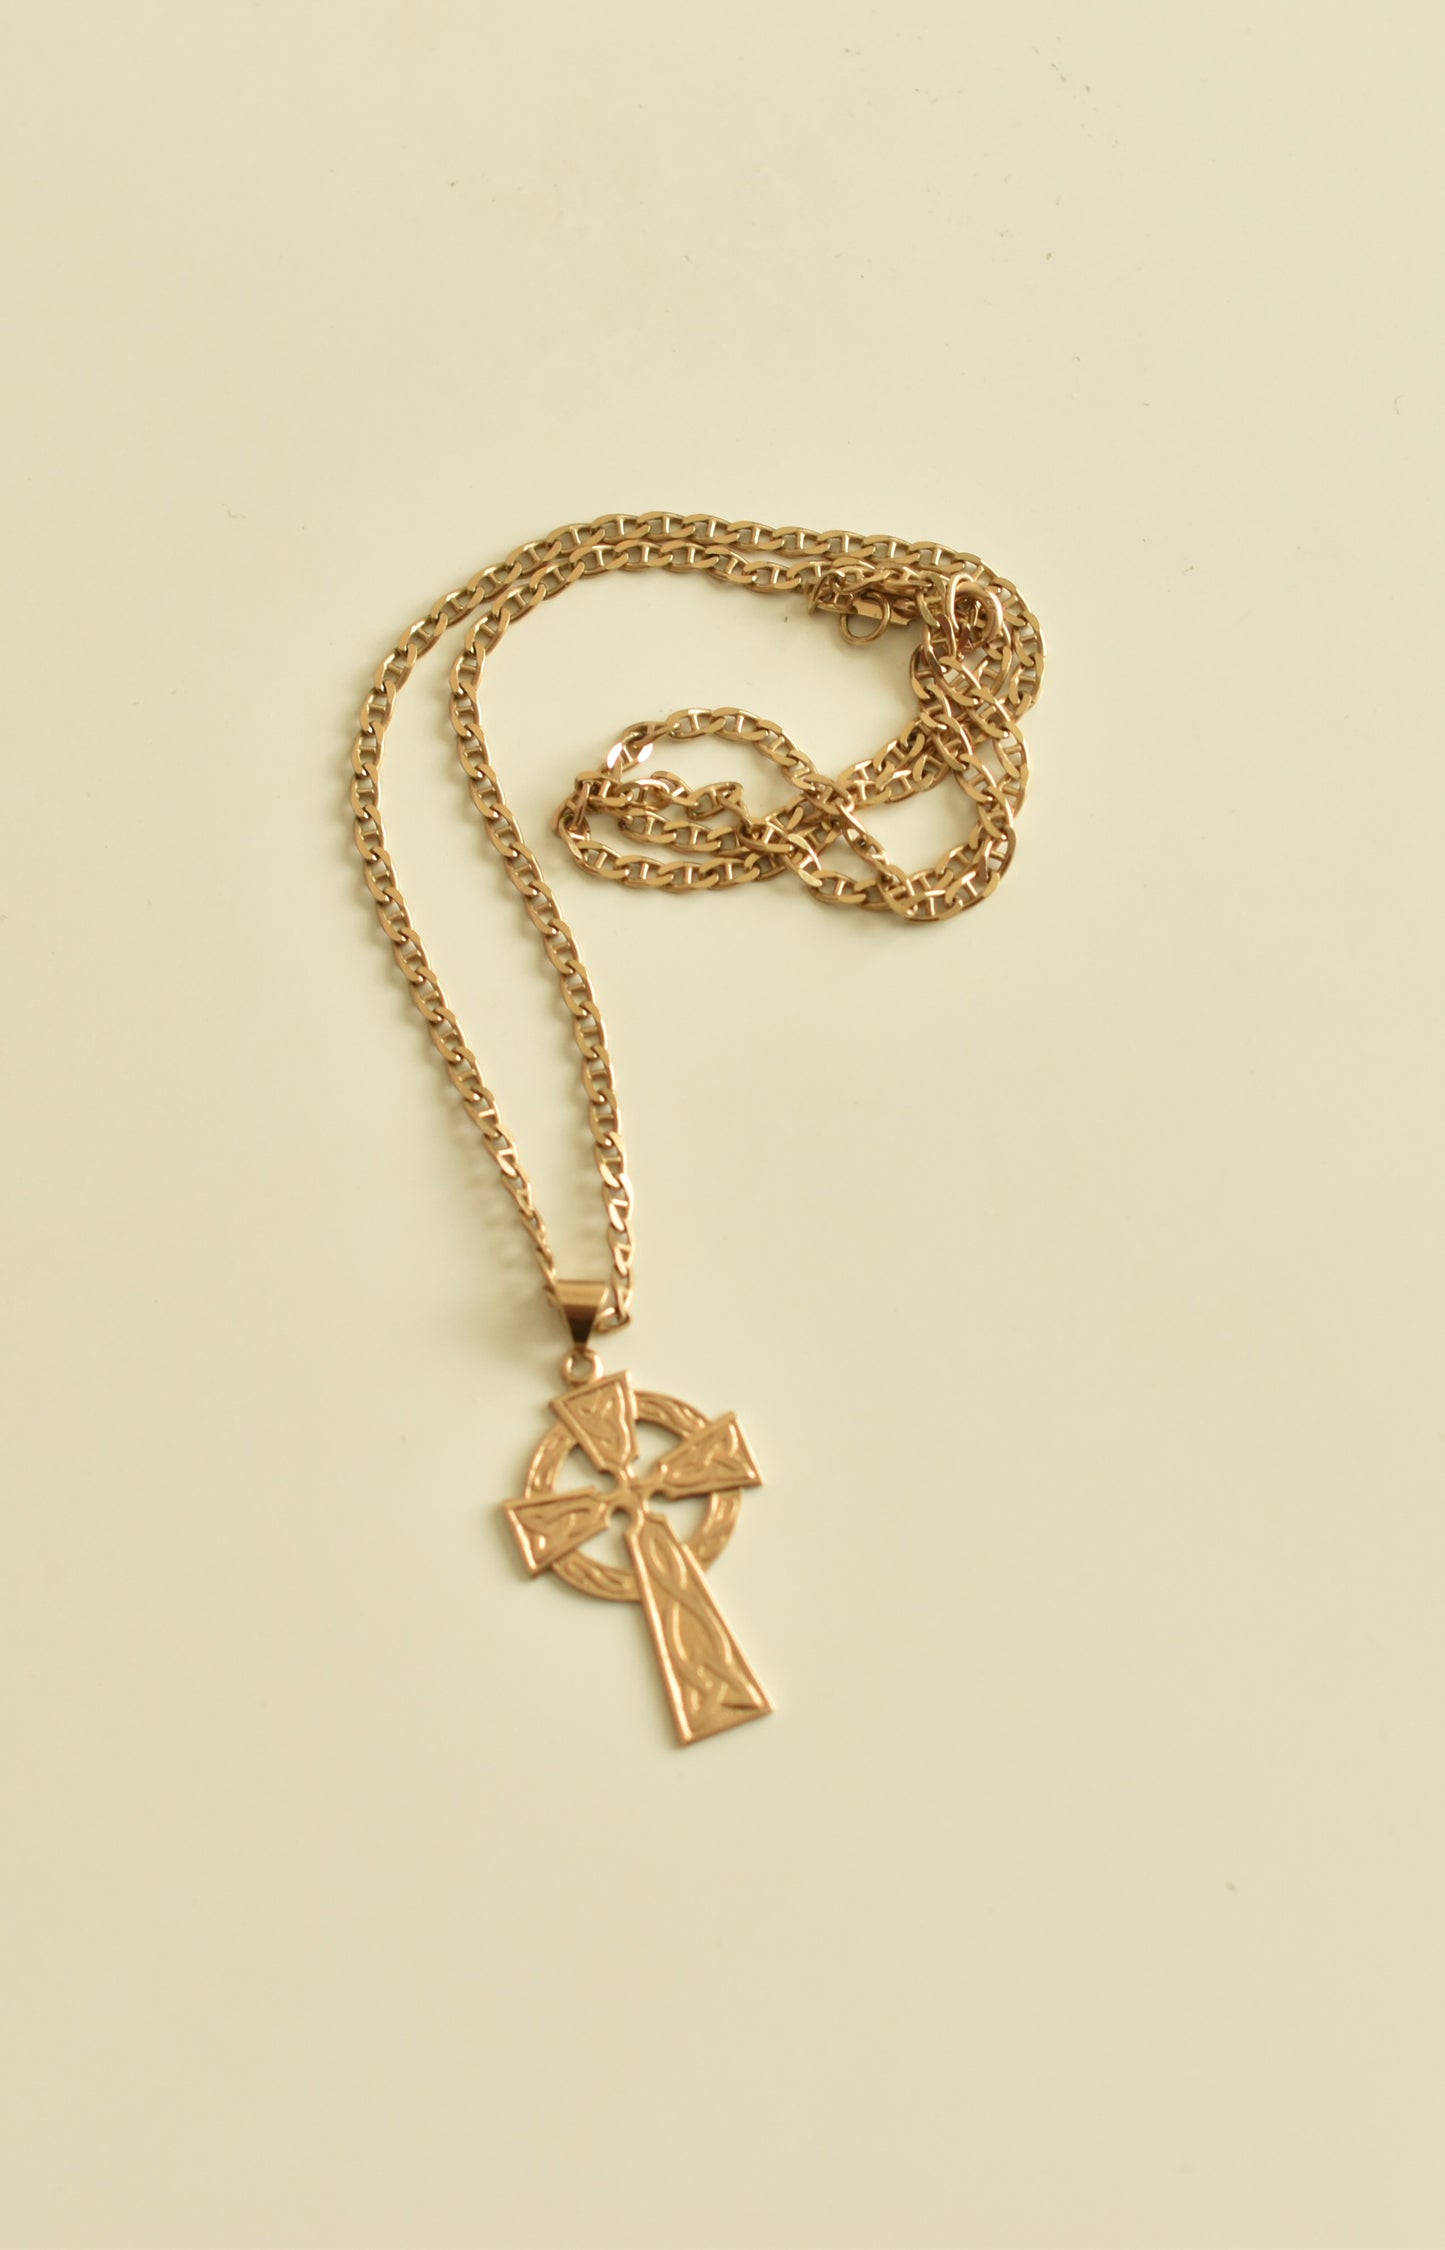 SOLD OUT - 9ct Gold Iona Cross Celtic Pendant Necklace